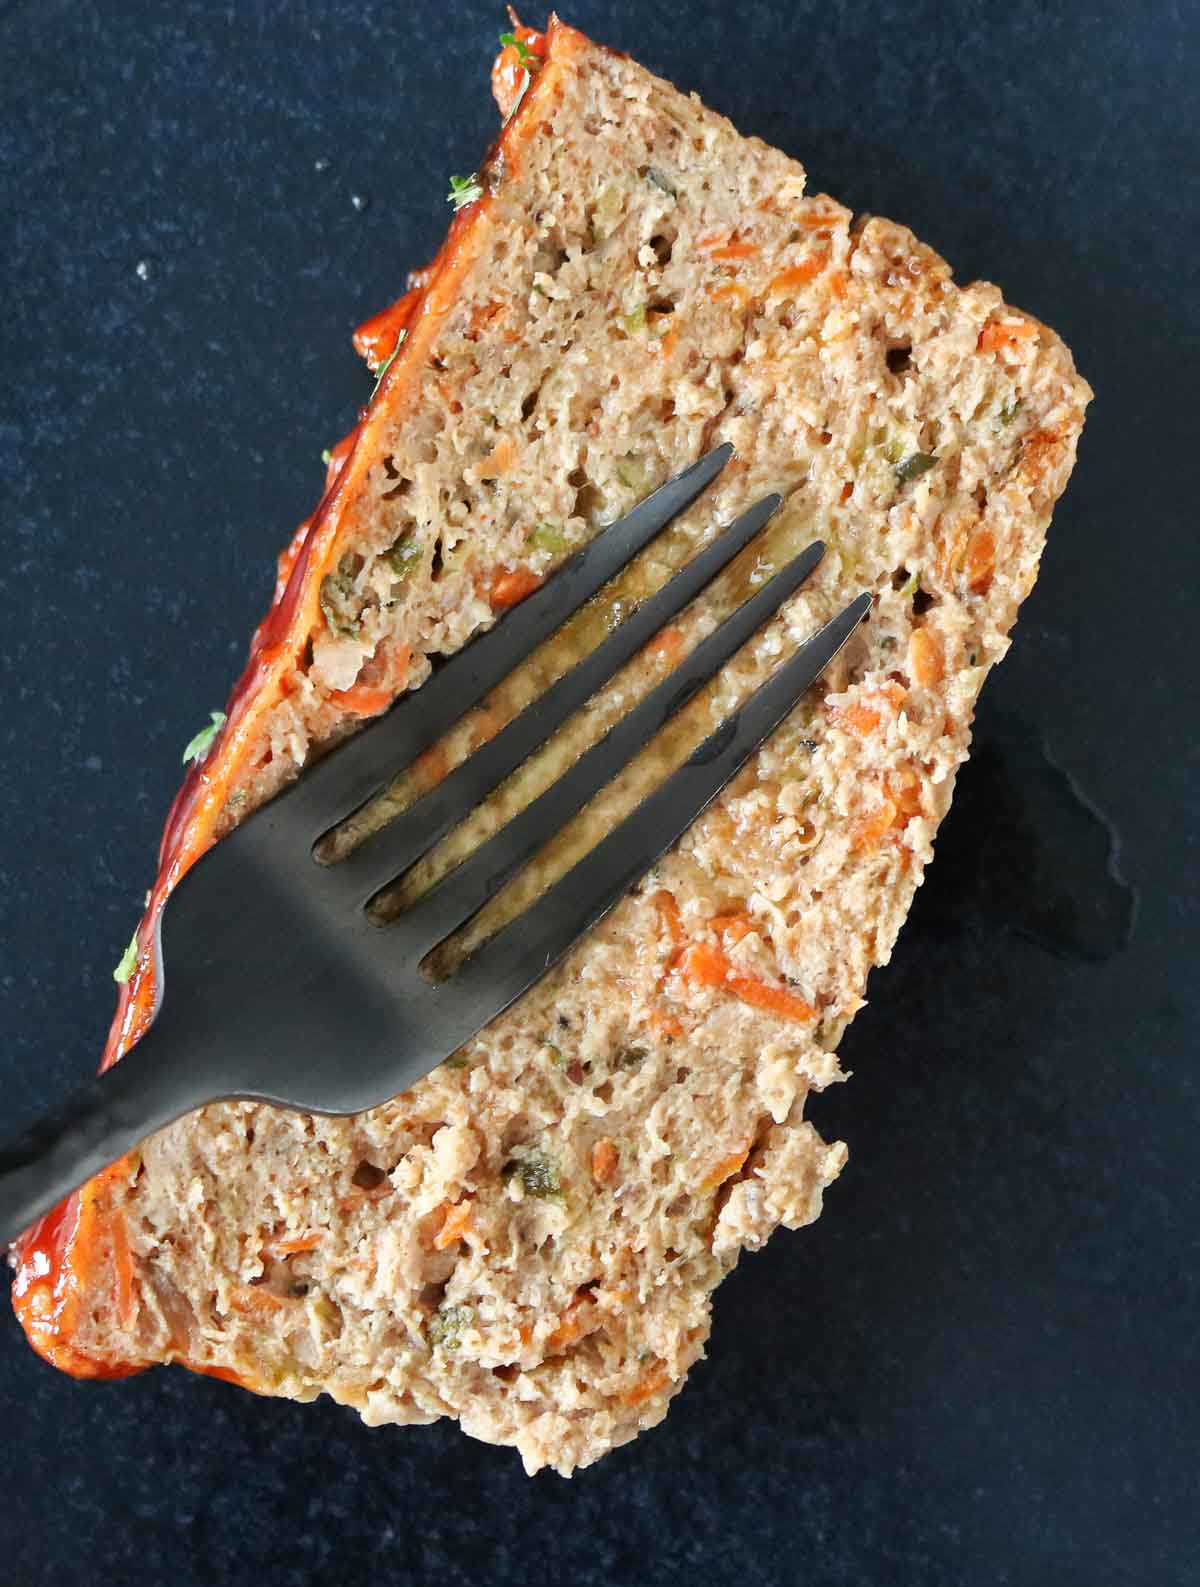 Fork pressing down on a slice of meatloaf, showing how juicy it is.